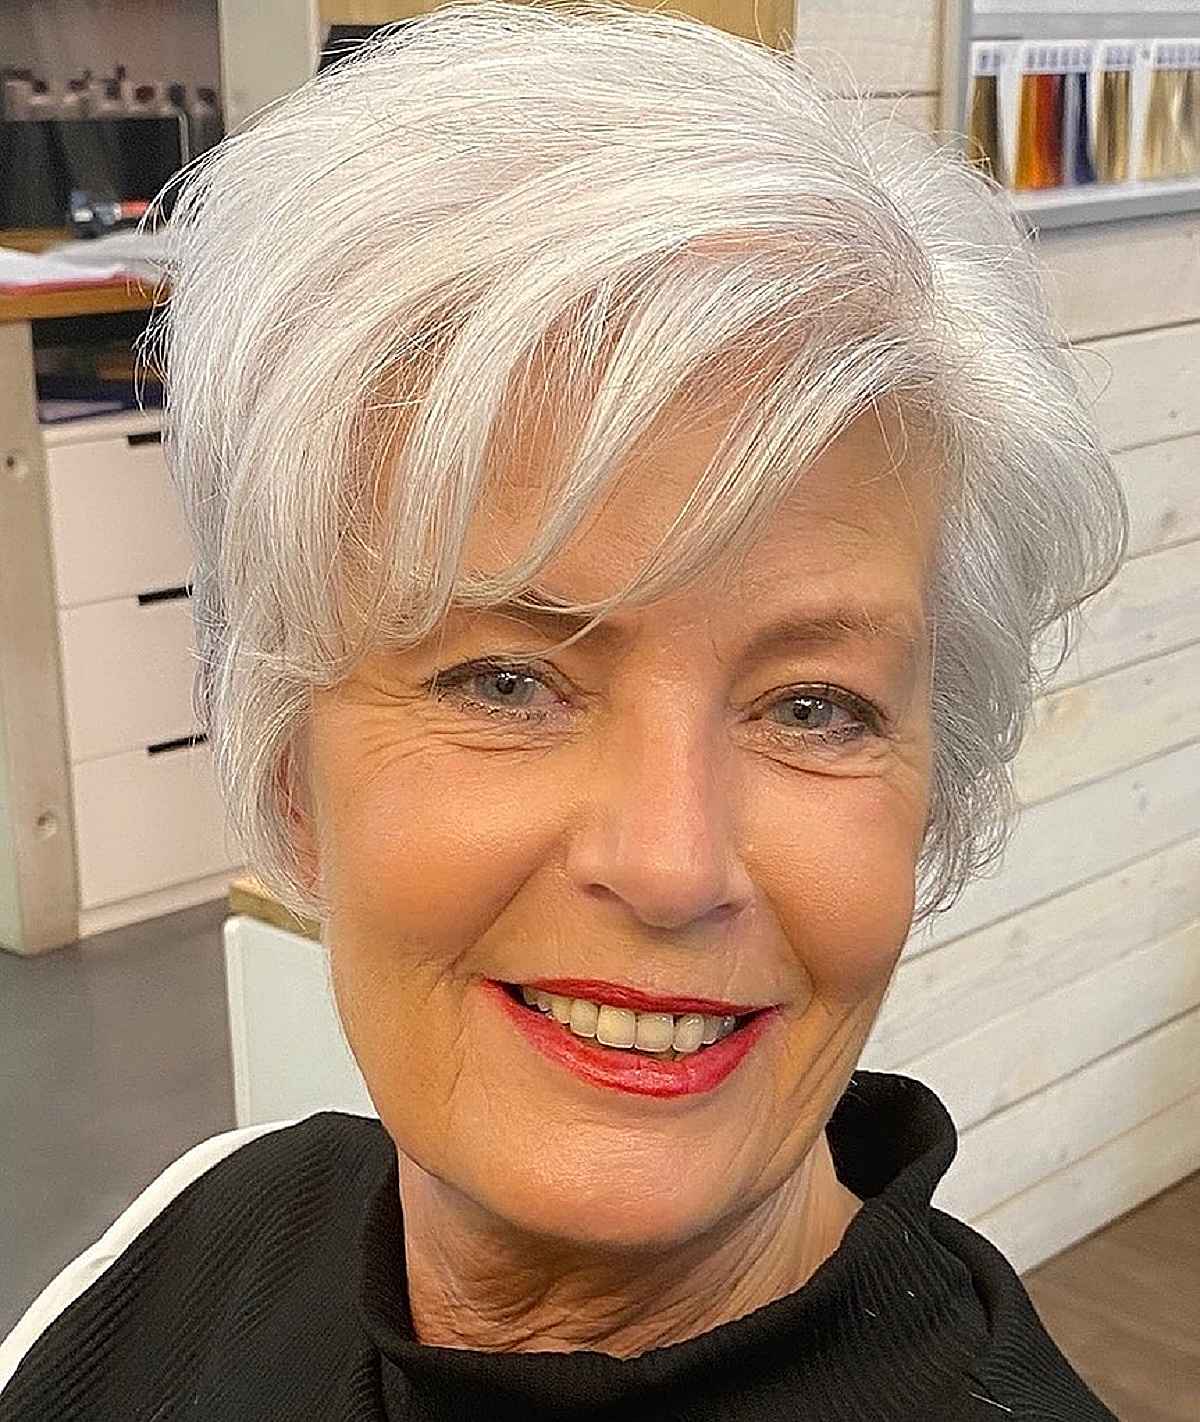 Ear-Length Crop with Side Bangs for 60 year old women